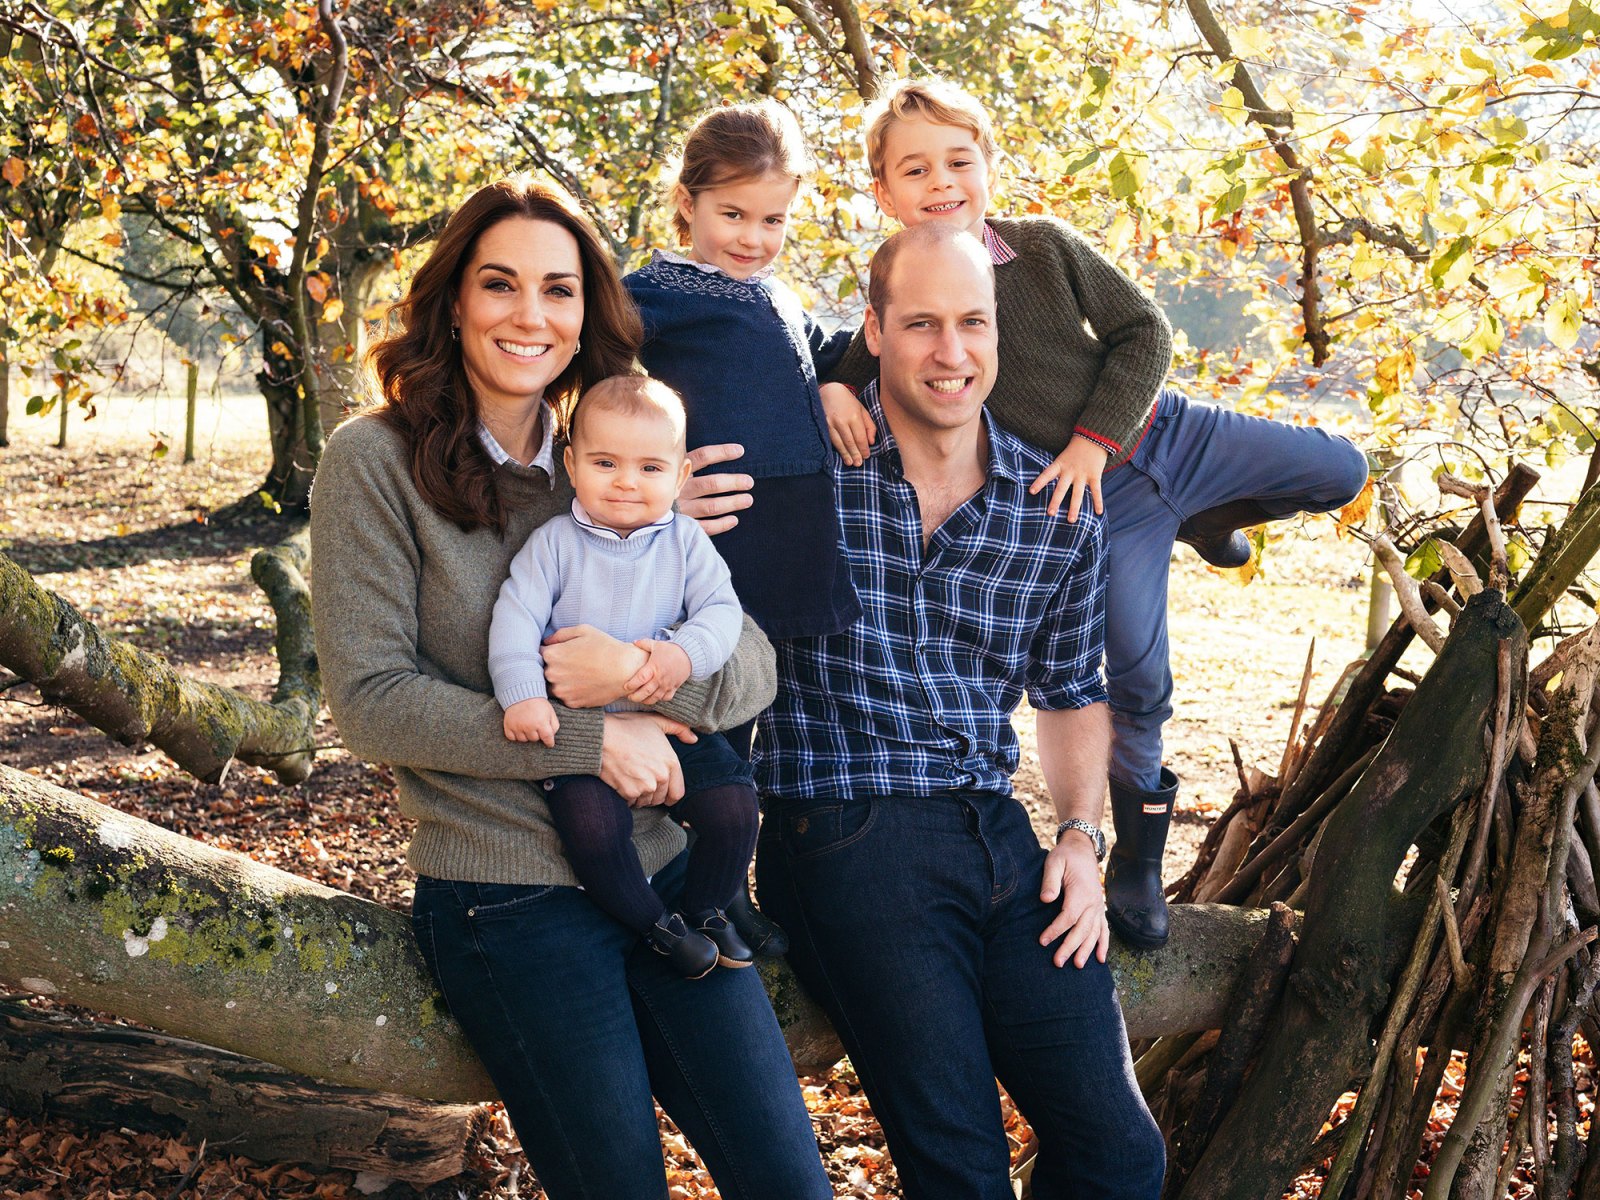 December 2018 Princess Charlotte Prince William Prince George Duchess Kate Catherine Prince Louis Duke and Duchess of Cambridge Royal Family Fashion Moments